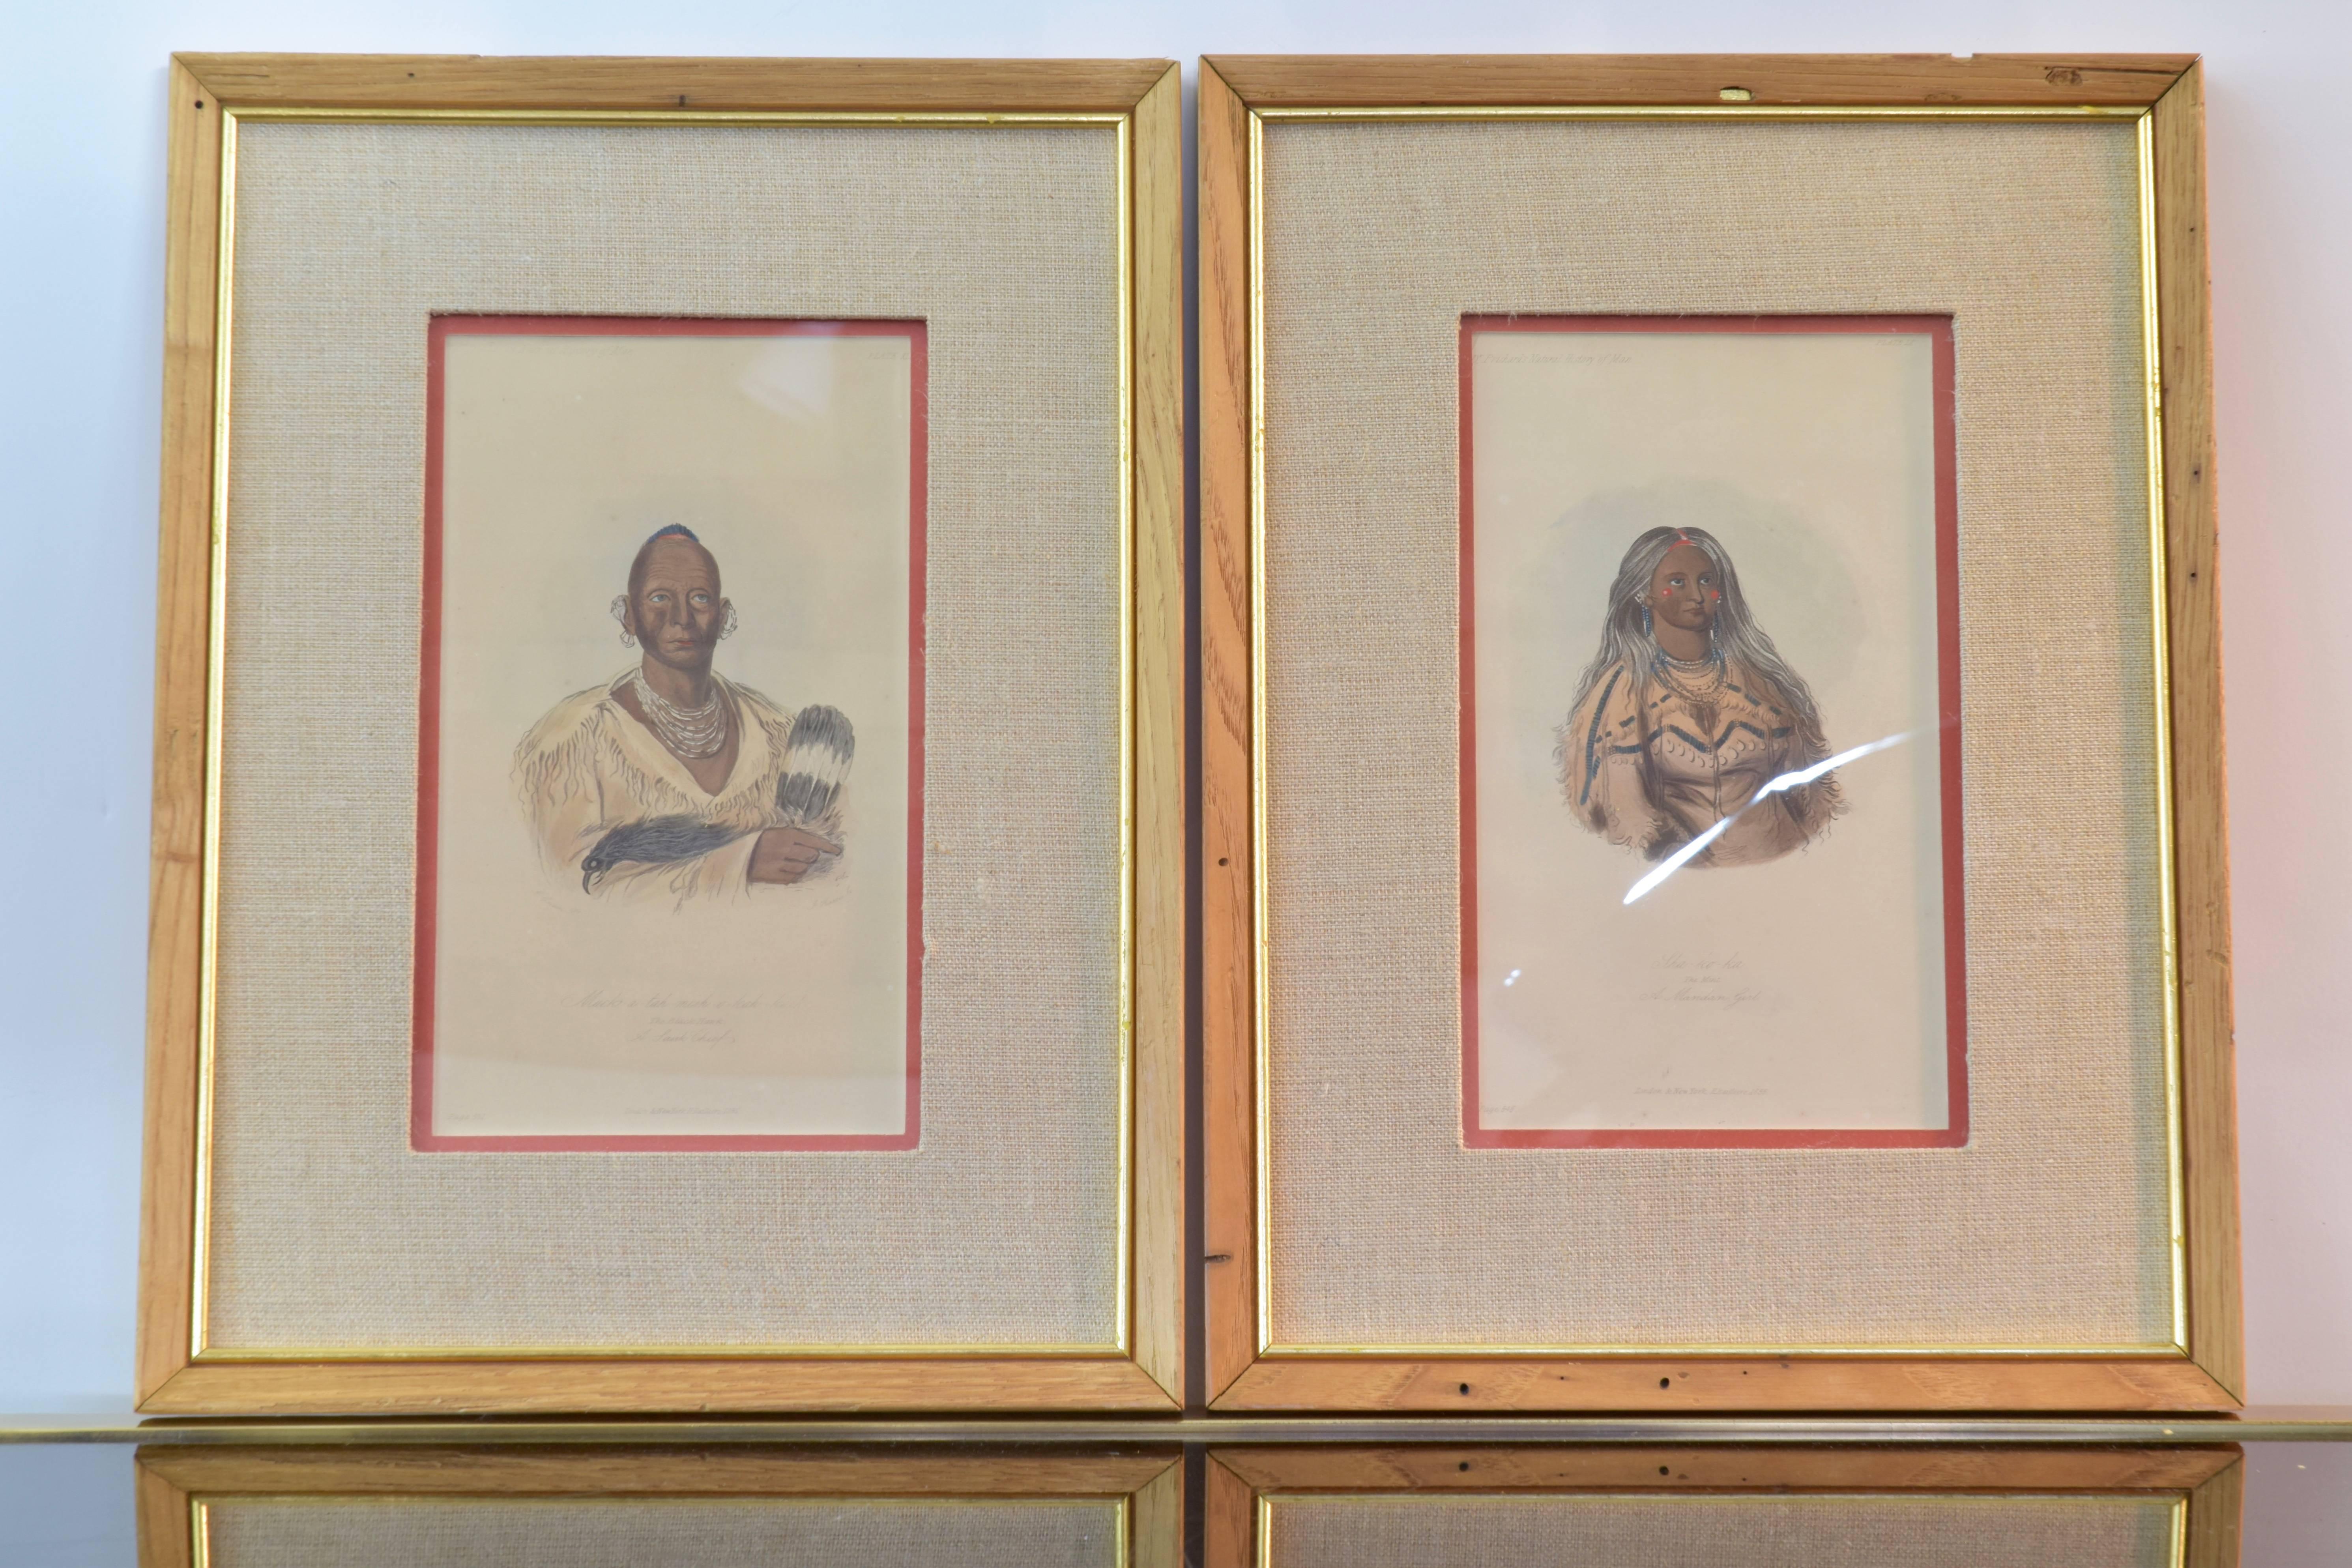 19th Century Collection of Six George Catlin Indian Hand-Colored Prints